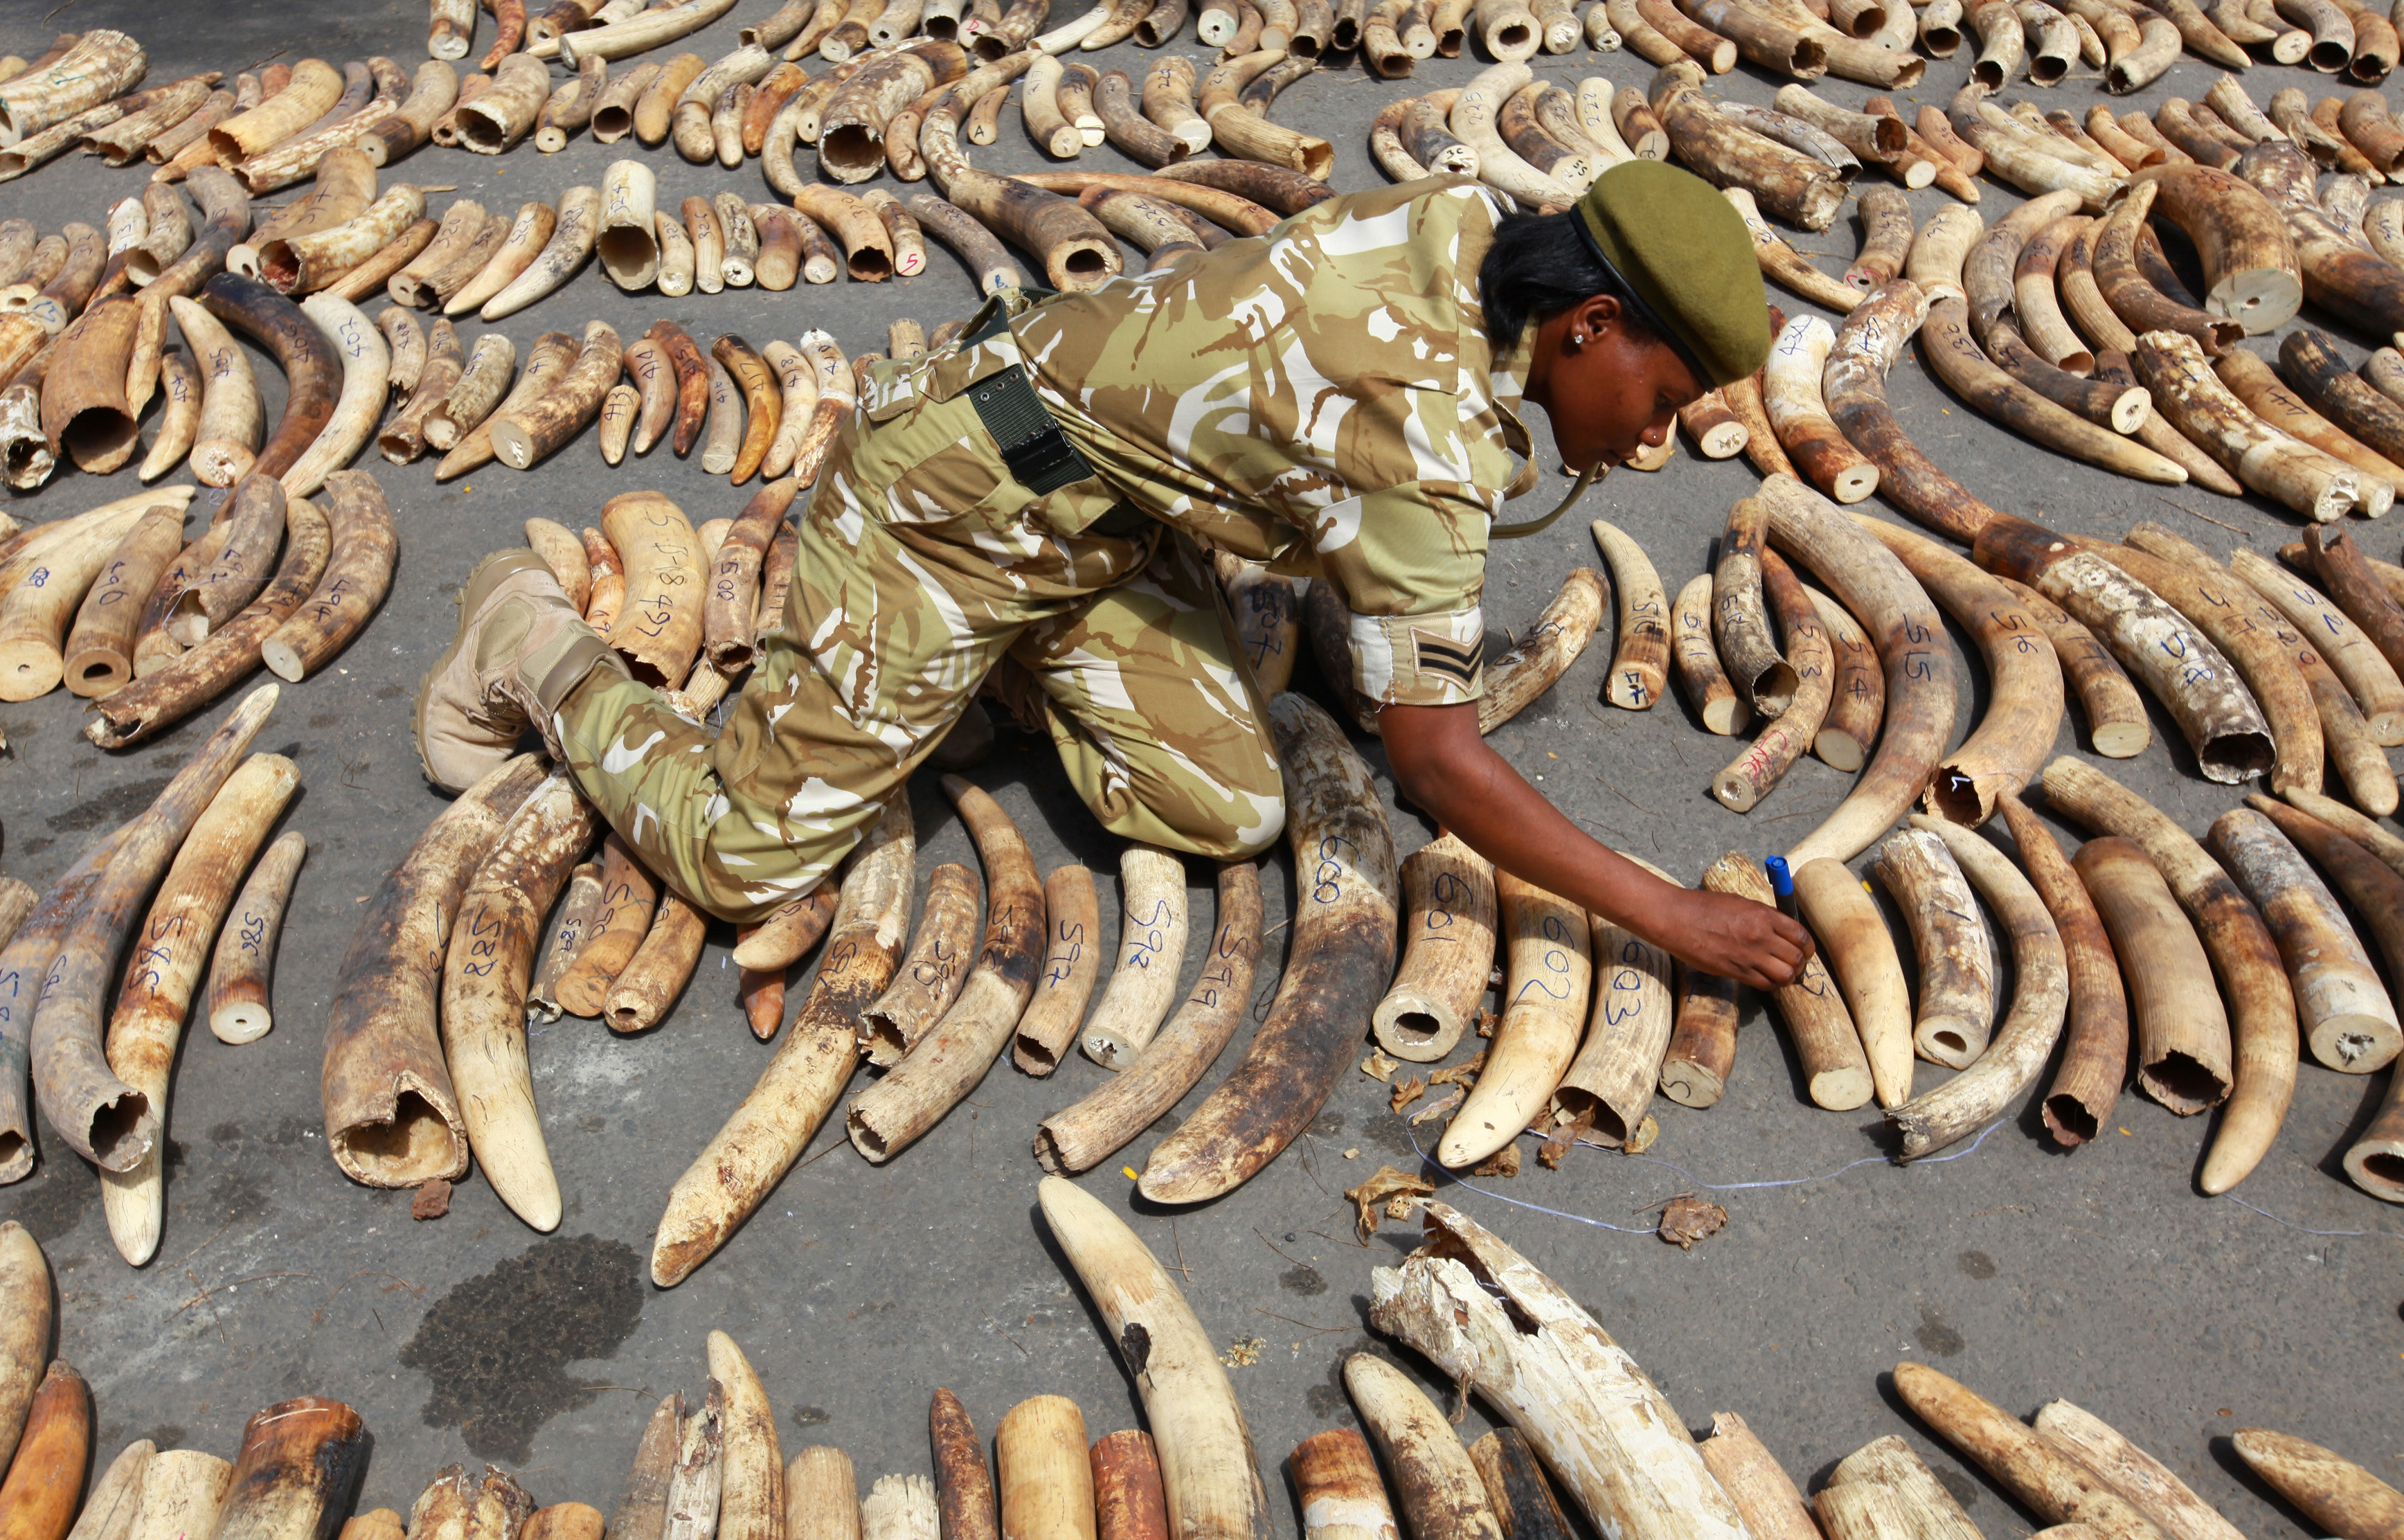 A Kenyan wildlife ranger inscribes markings on the 775 elephant tusks that was seized by the port police at the container terminal destined for Malaysia in the coastal town of Mombasa